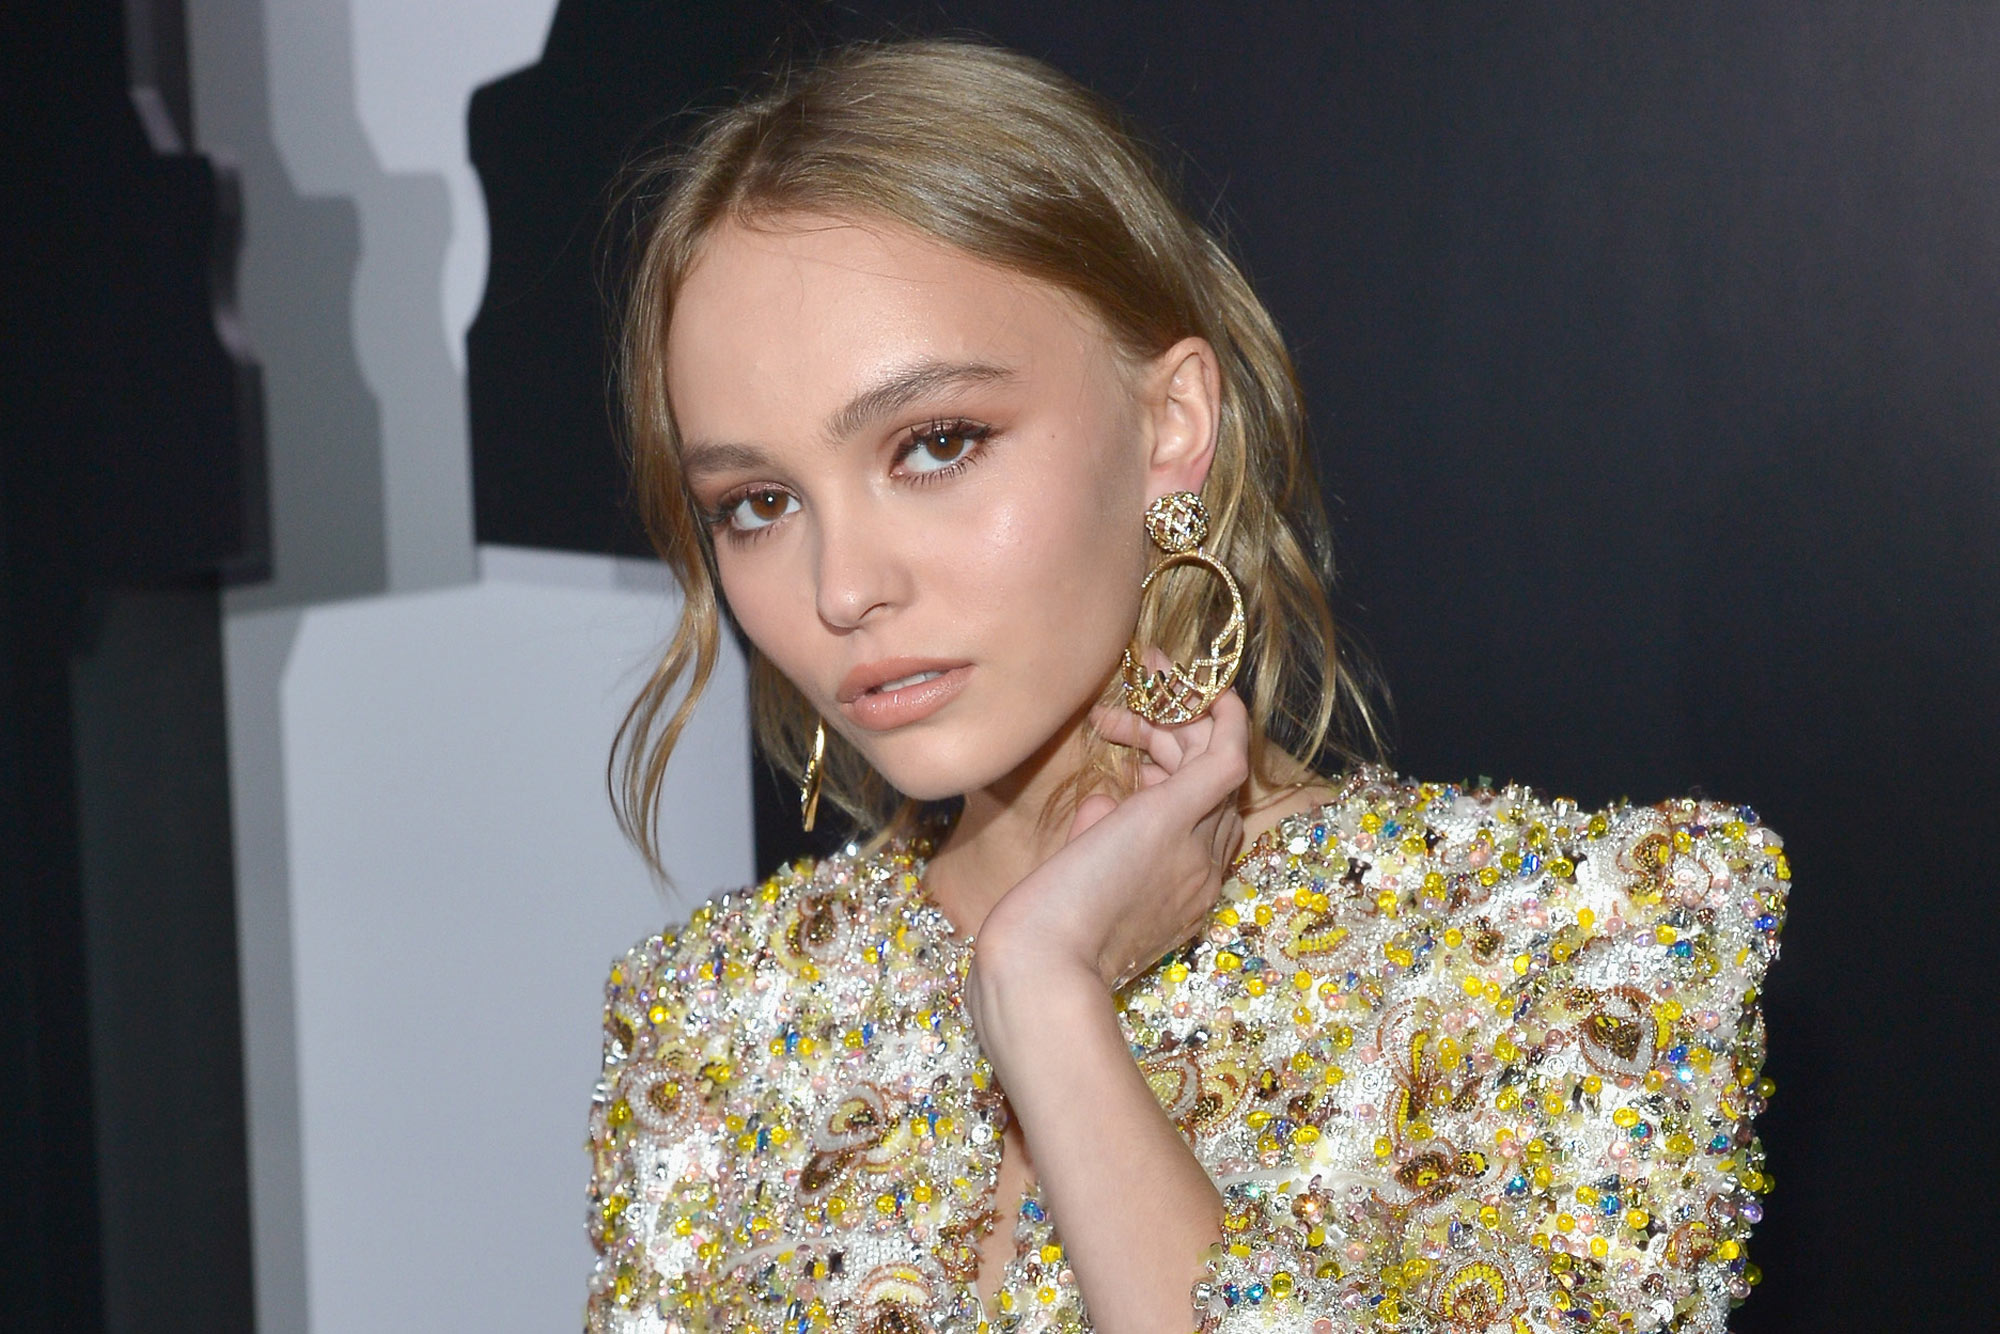 Lily Rose Depp 2018 Wallpapers